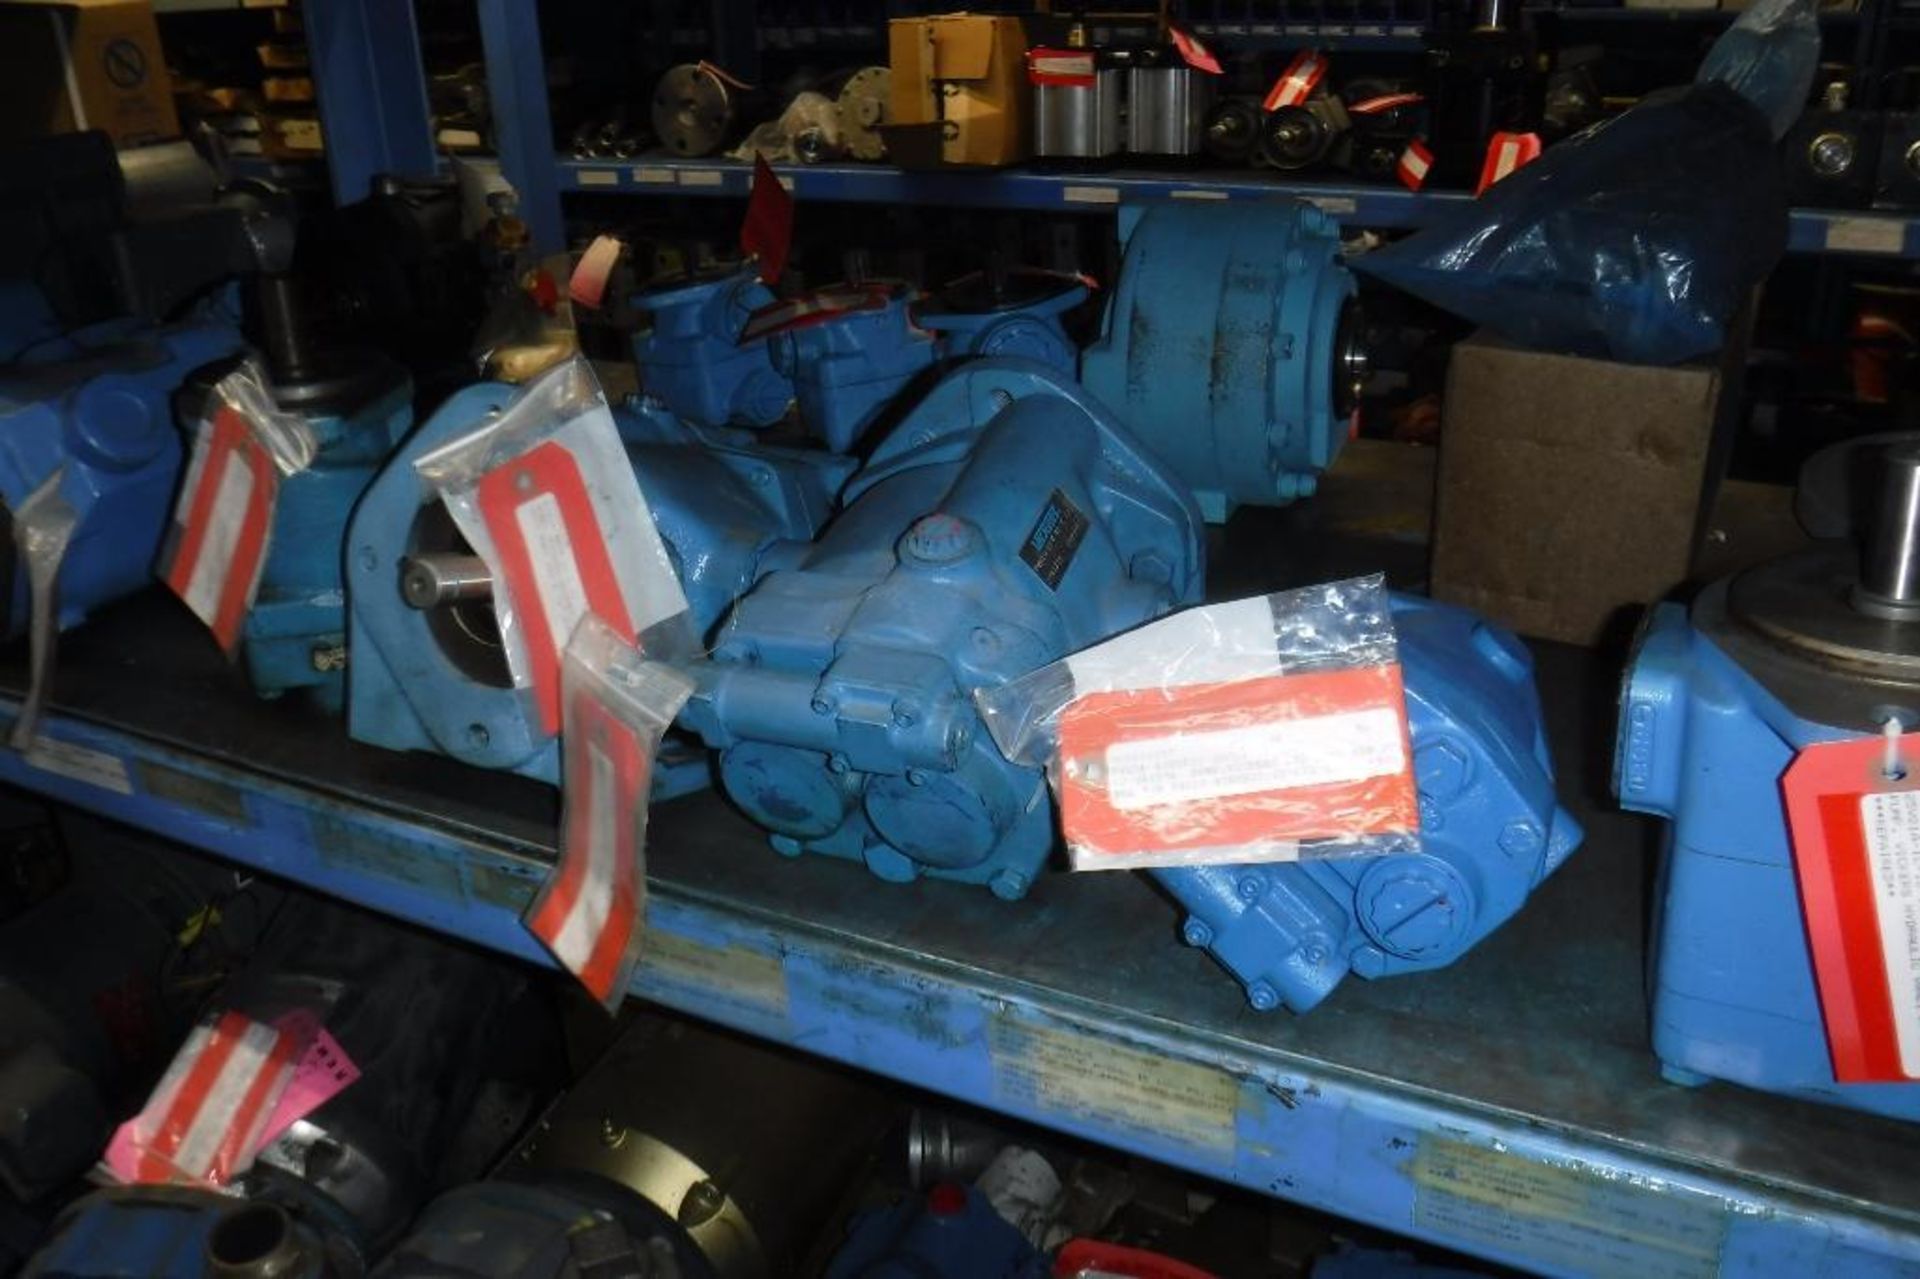 Contents of Rack 505S-Gear Boxes, Pumps, Etc., MUST REMOVE BY 2/14/20-MUST BE REMOVED IN THE ENTIRIT - Image 9 of 34